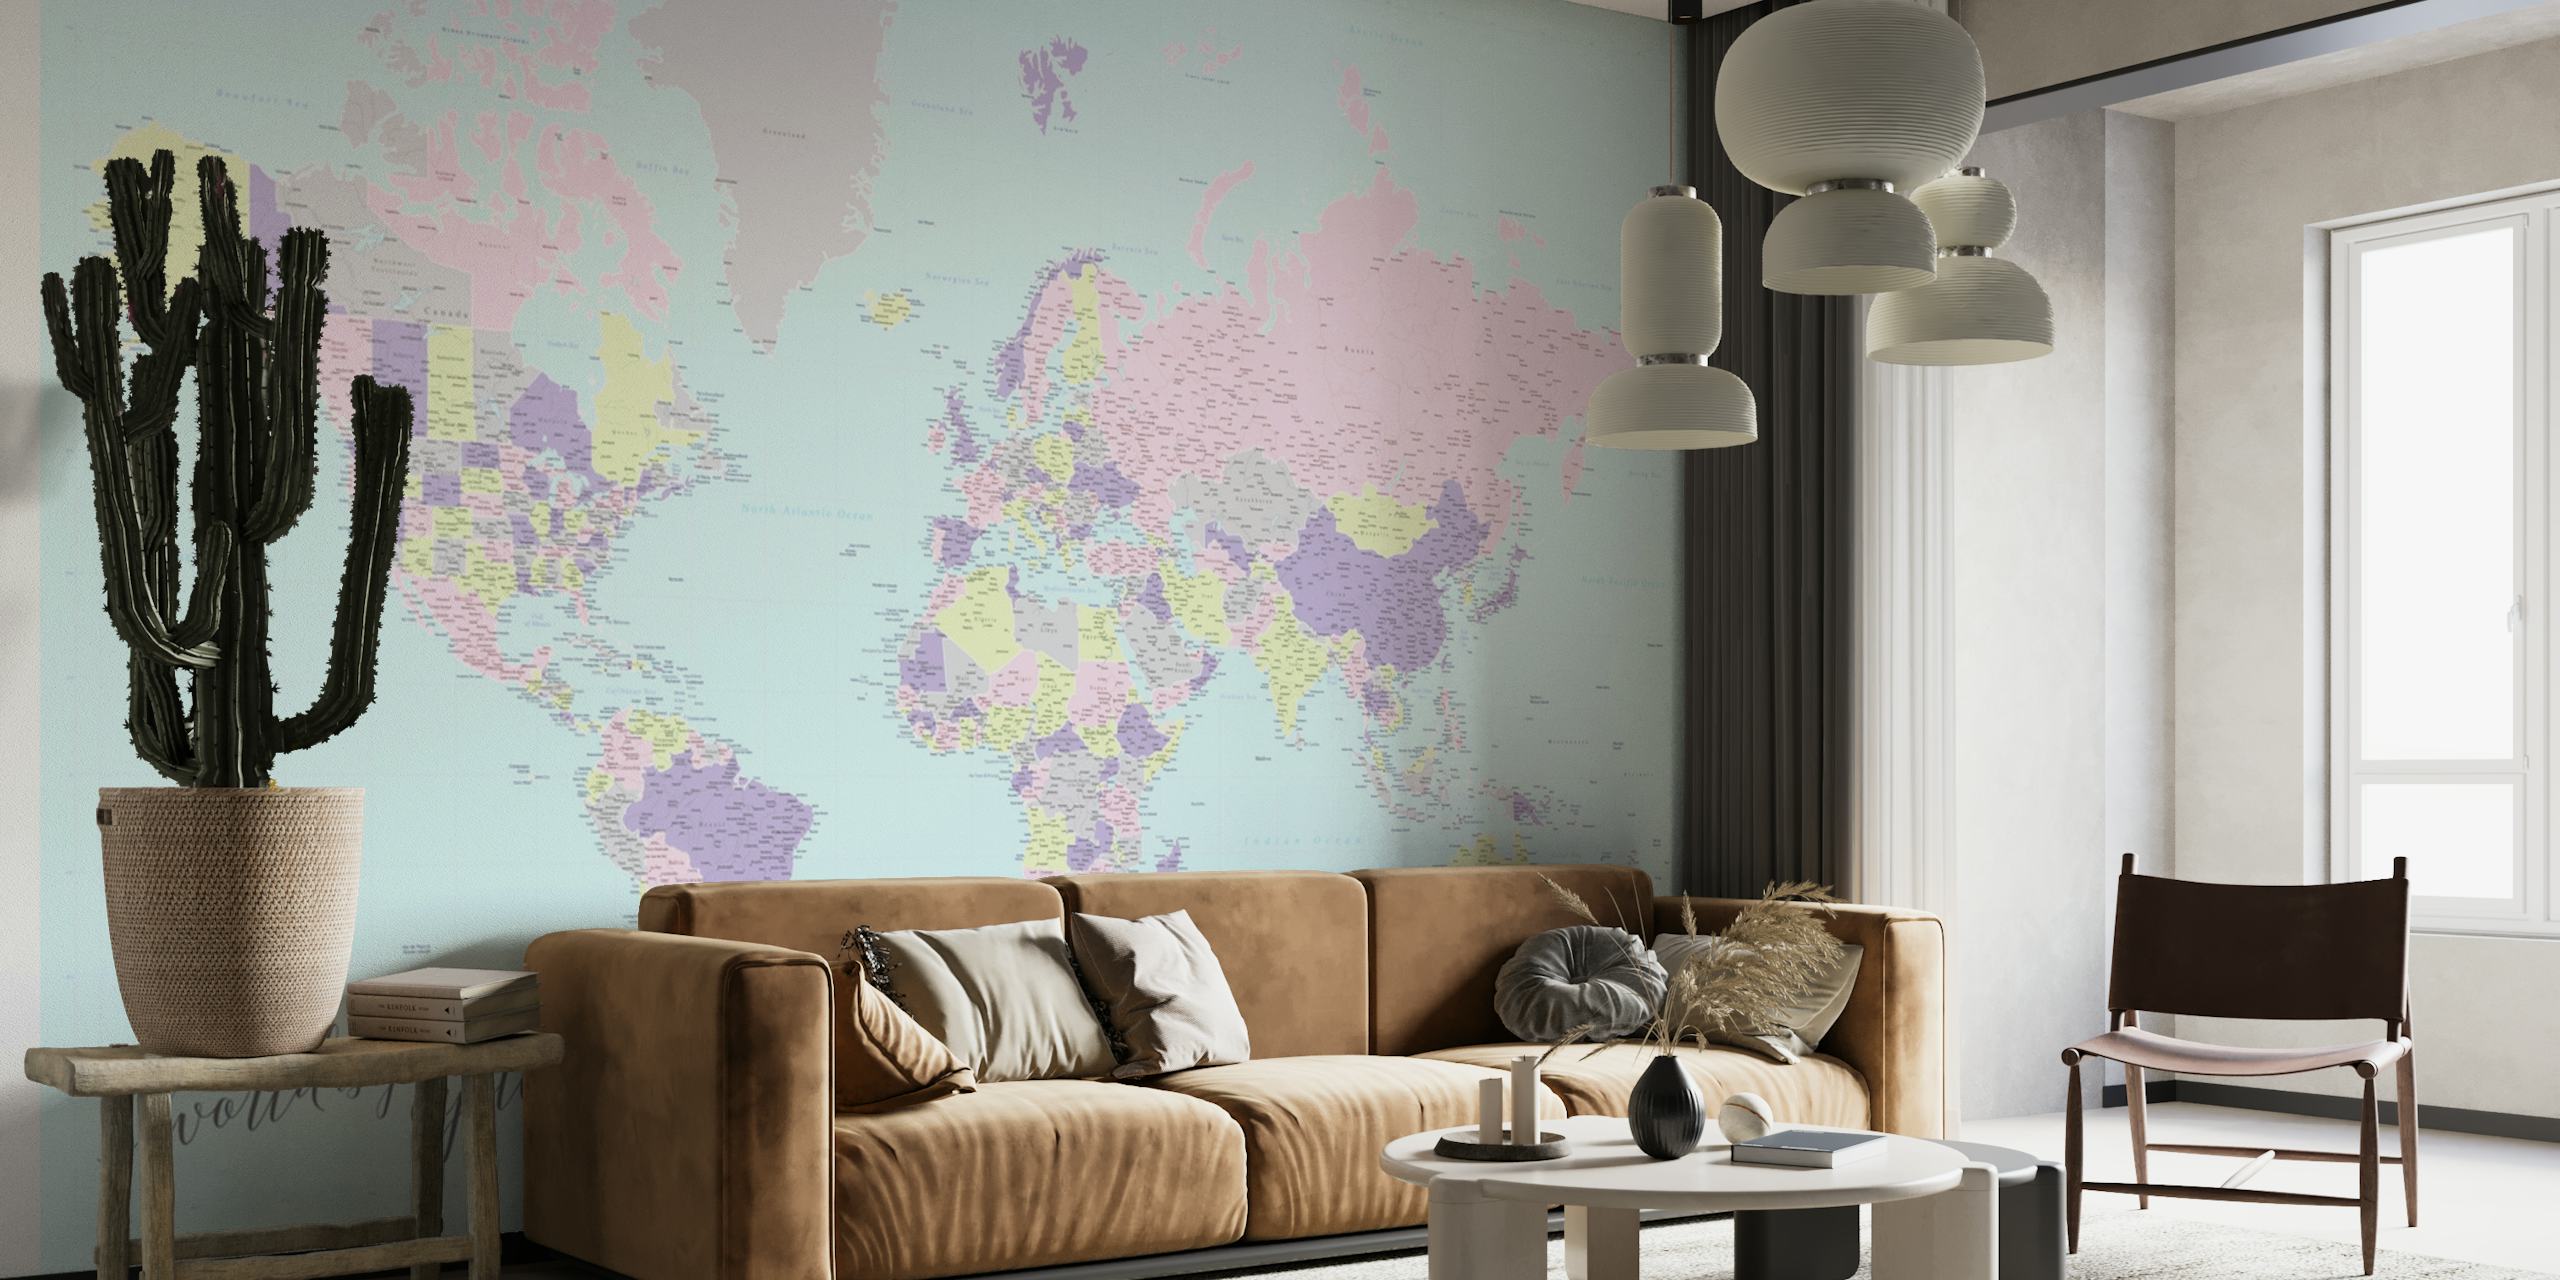 Pastel-colored Oyster World Map Hatsu wall mural with artistic continent representations